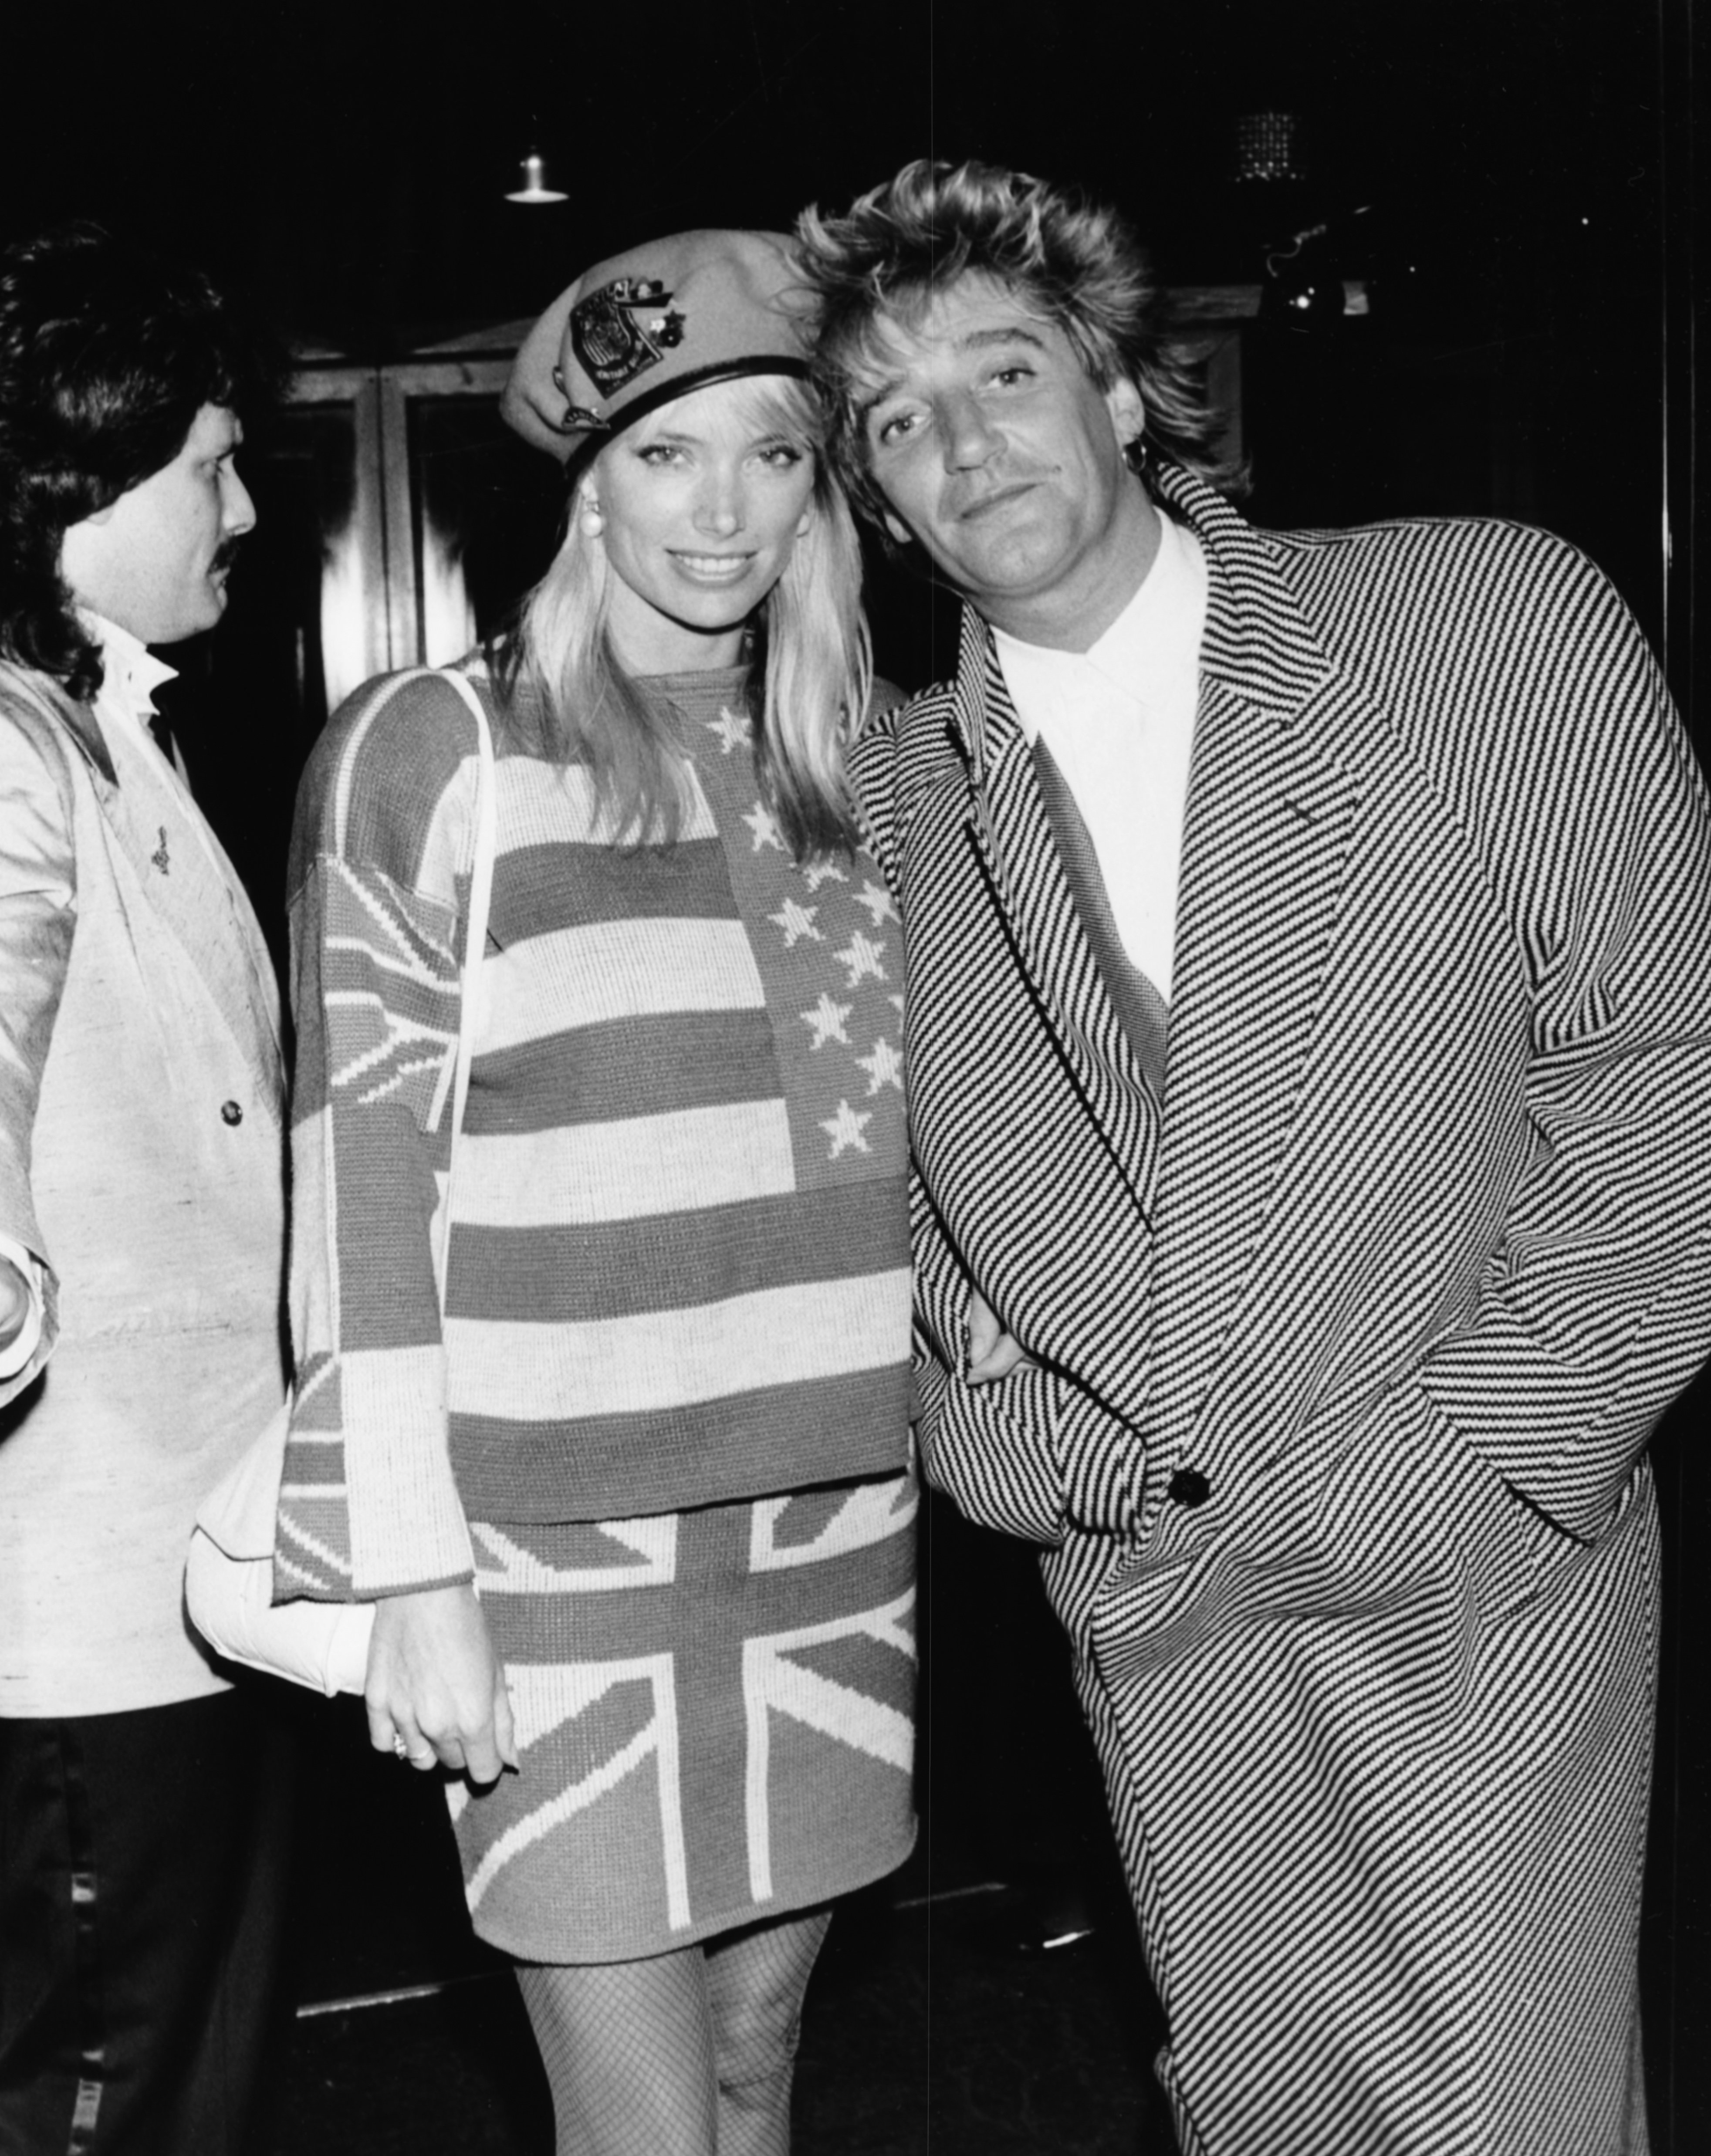 Rod Stewart and model Kelly Emberg at Stringfellows nightclub in London, September 18th 1986 | Photo: GettyImages